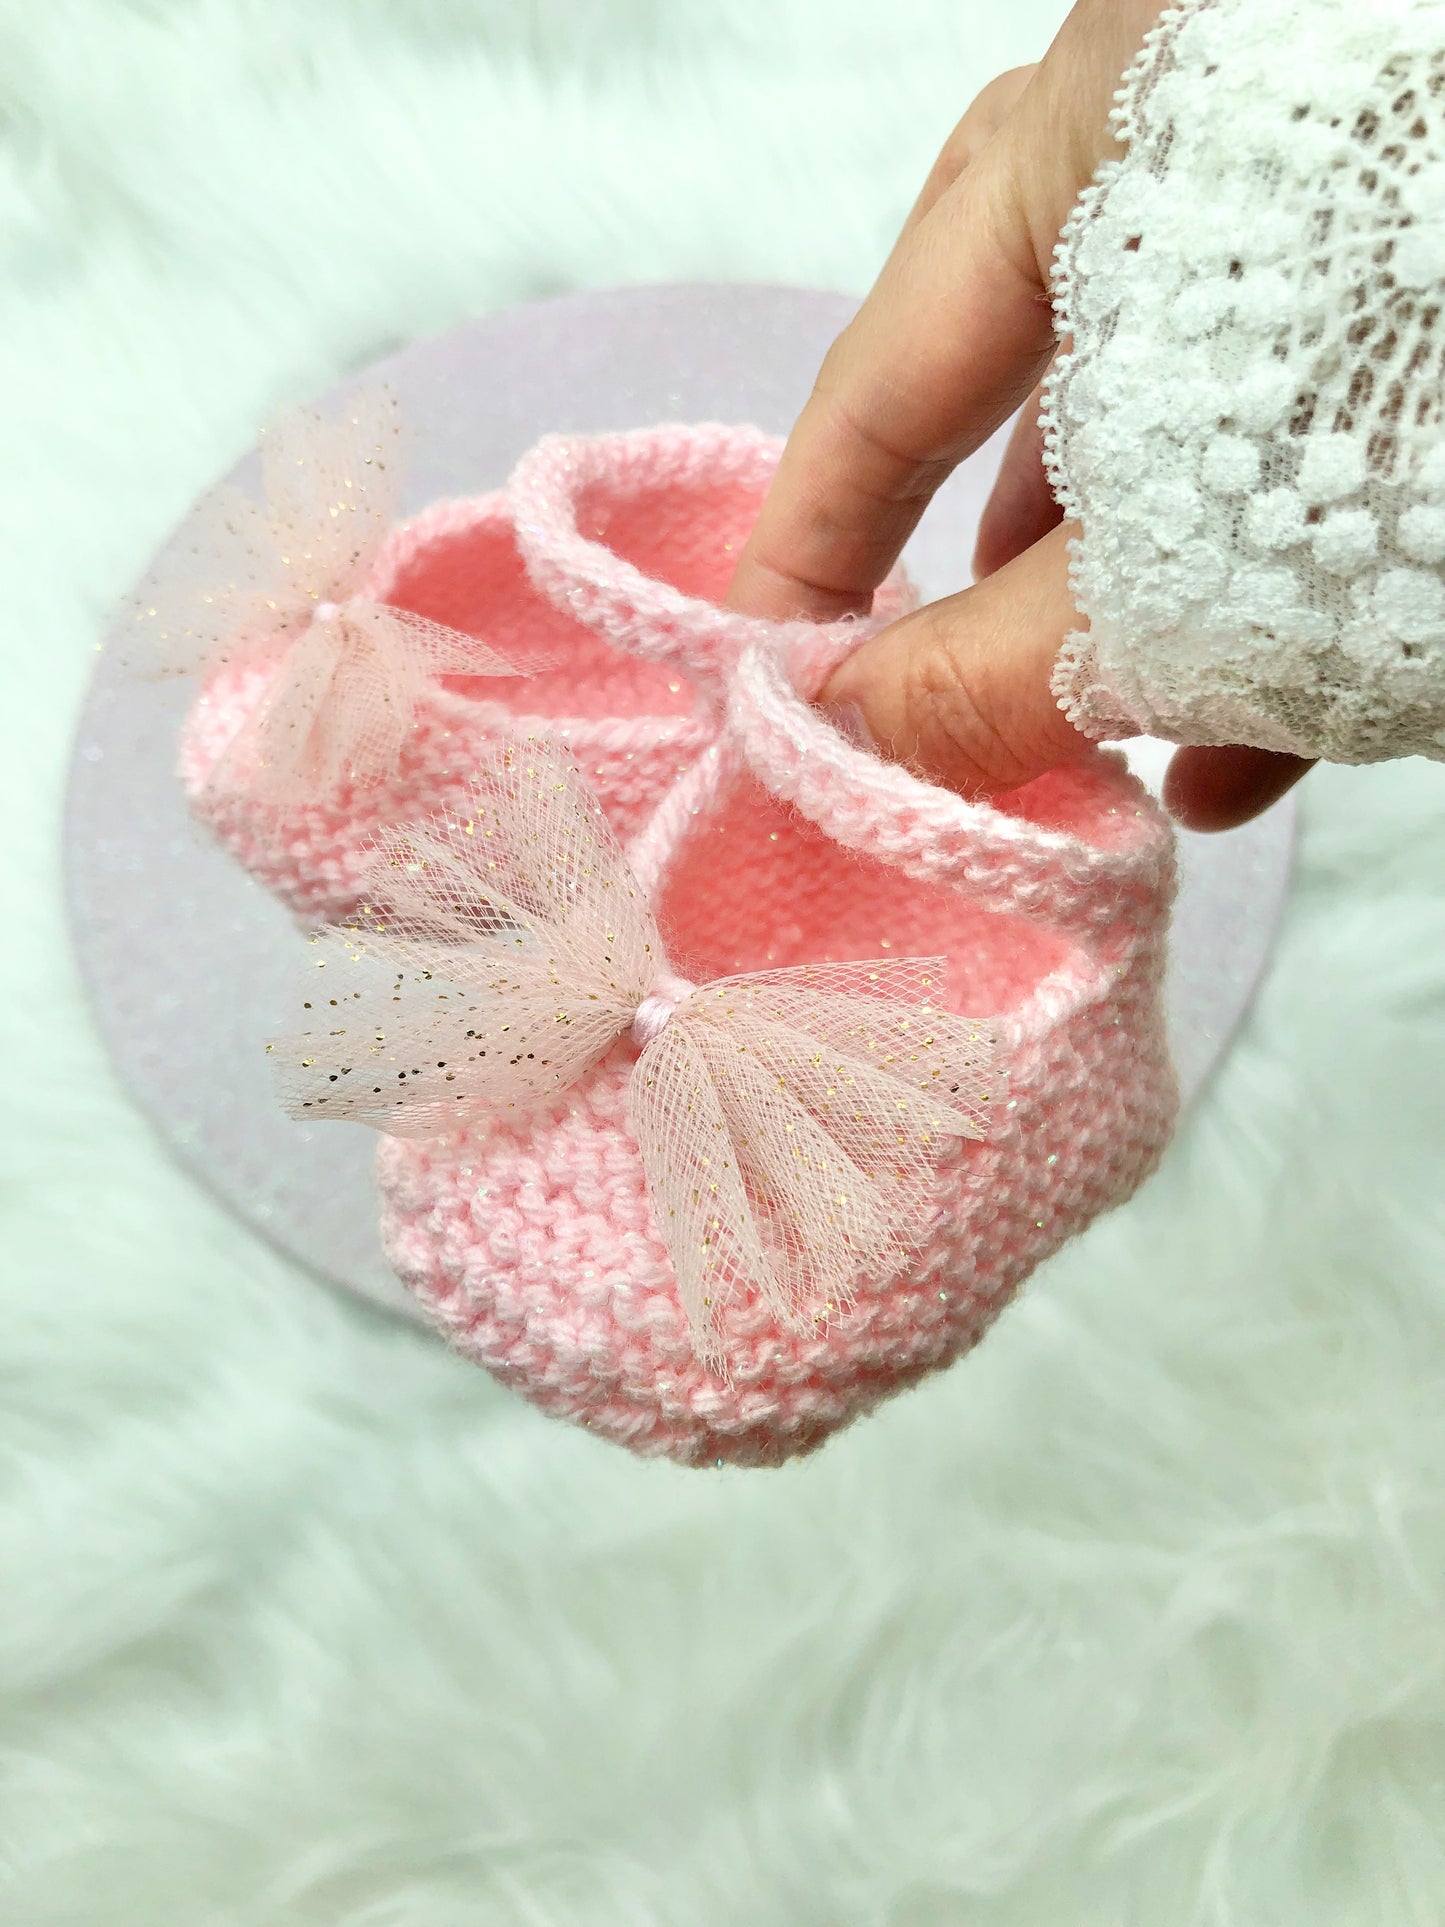 Chaussons/Ballerines roses au tricot